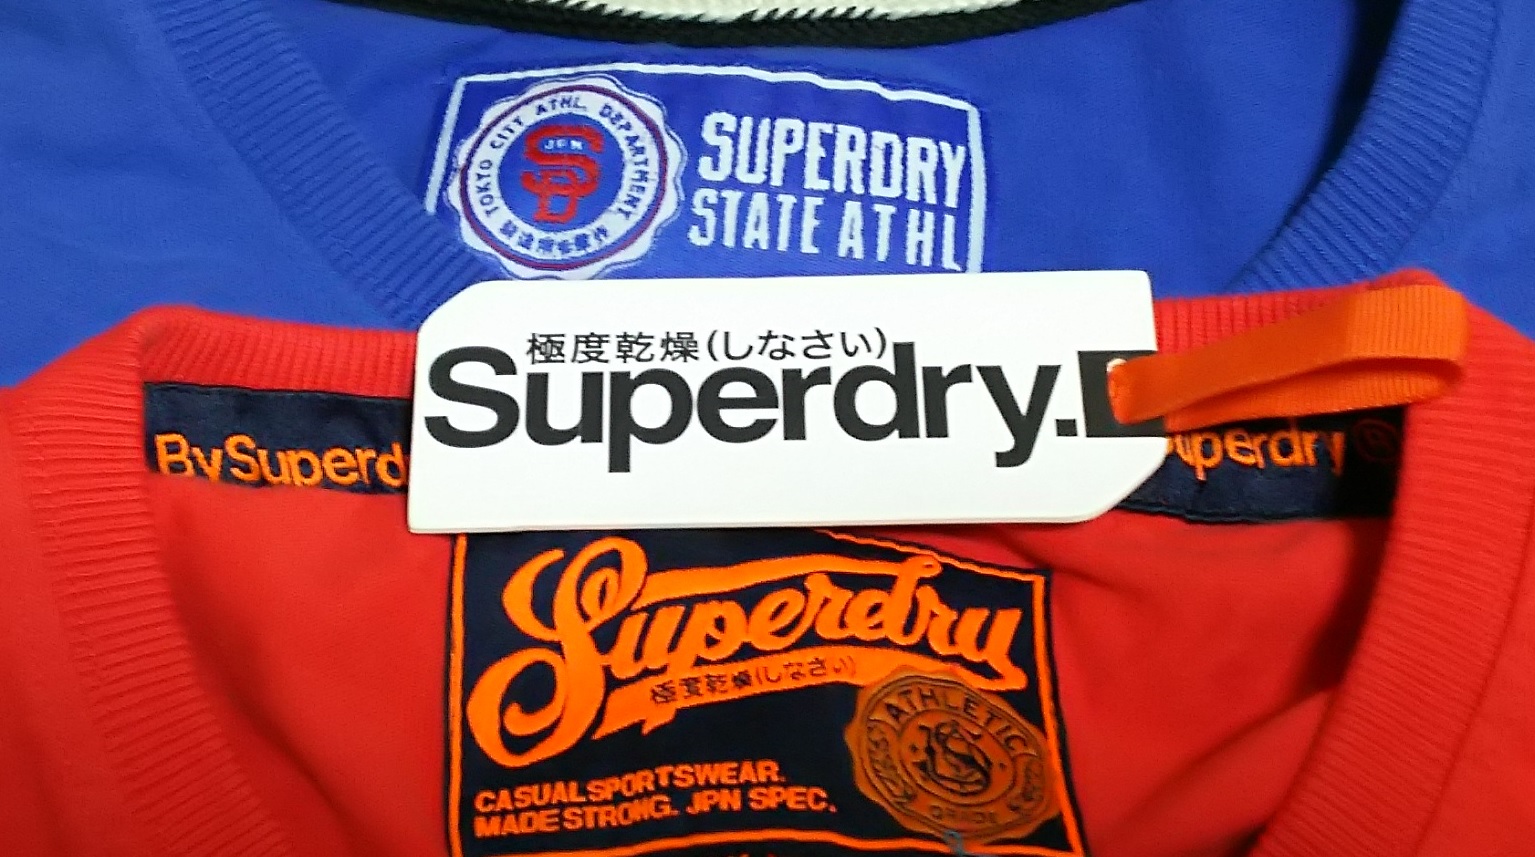 Superdry: The “Japanese” fashion brand that most Japanese people